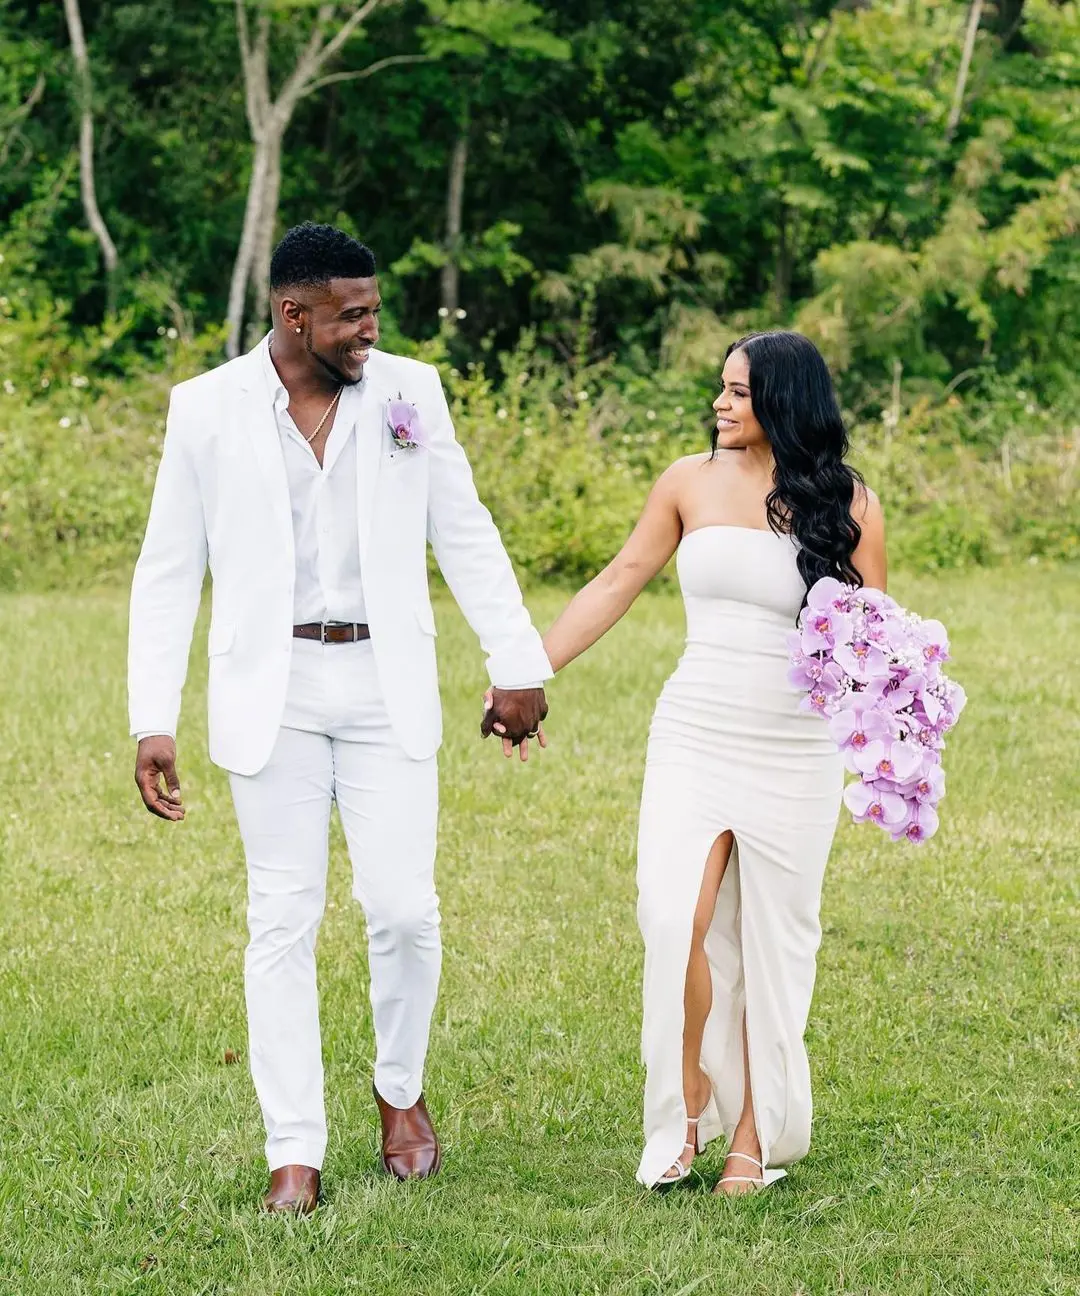 Keanu Neal and Krizia Horta got marriage in the church on May 12